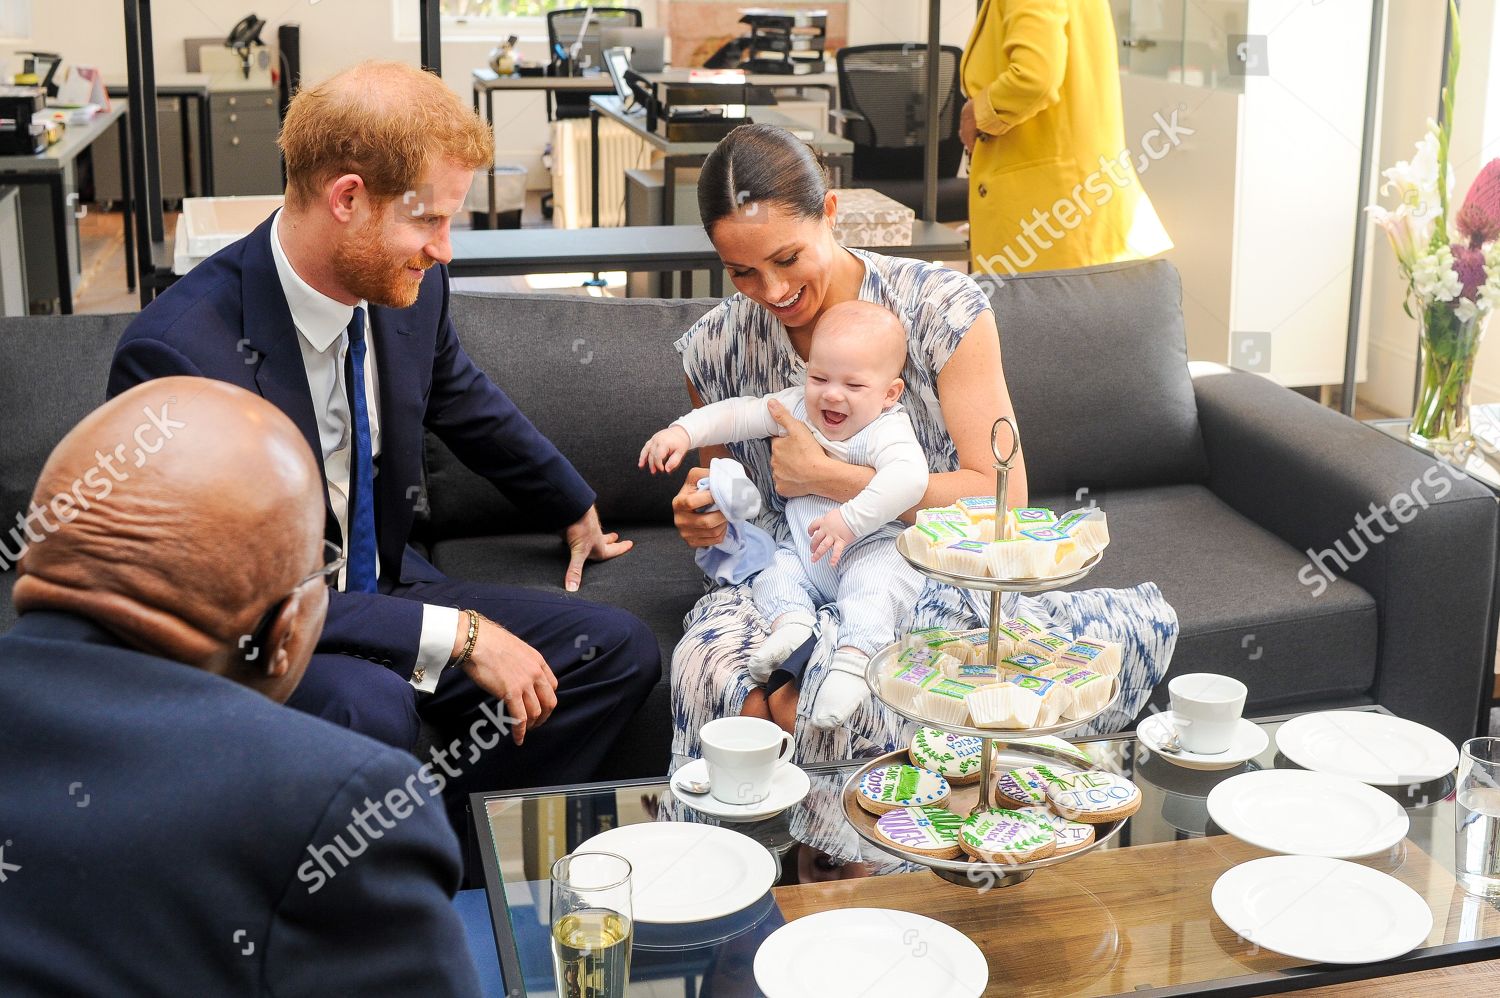 prince-harry-and-meghan-duchess-of-sussex-visit-to-africa-shutterstock-editorial-10423664ah.jpg